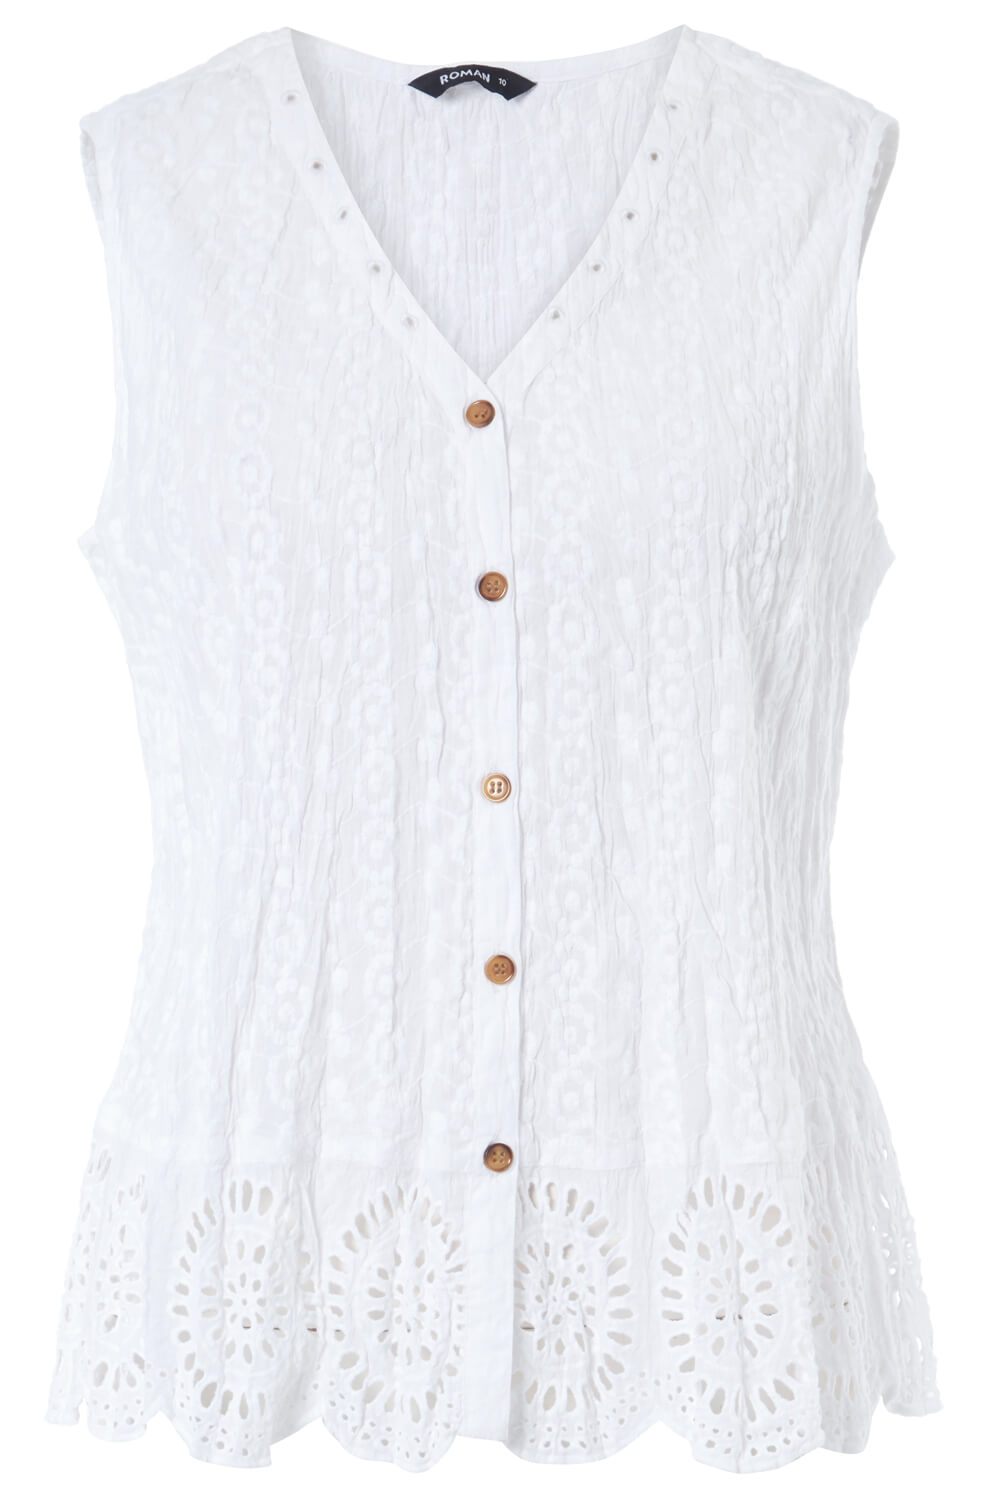 Eyelet Detail Embroidered Crinkle Blouse in White - Roman Originals UK